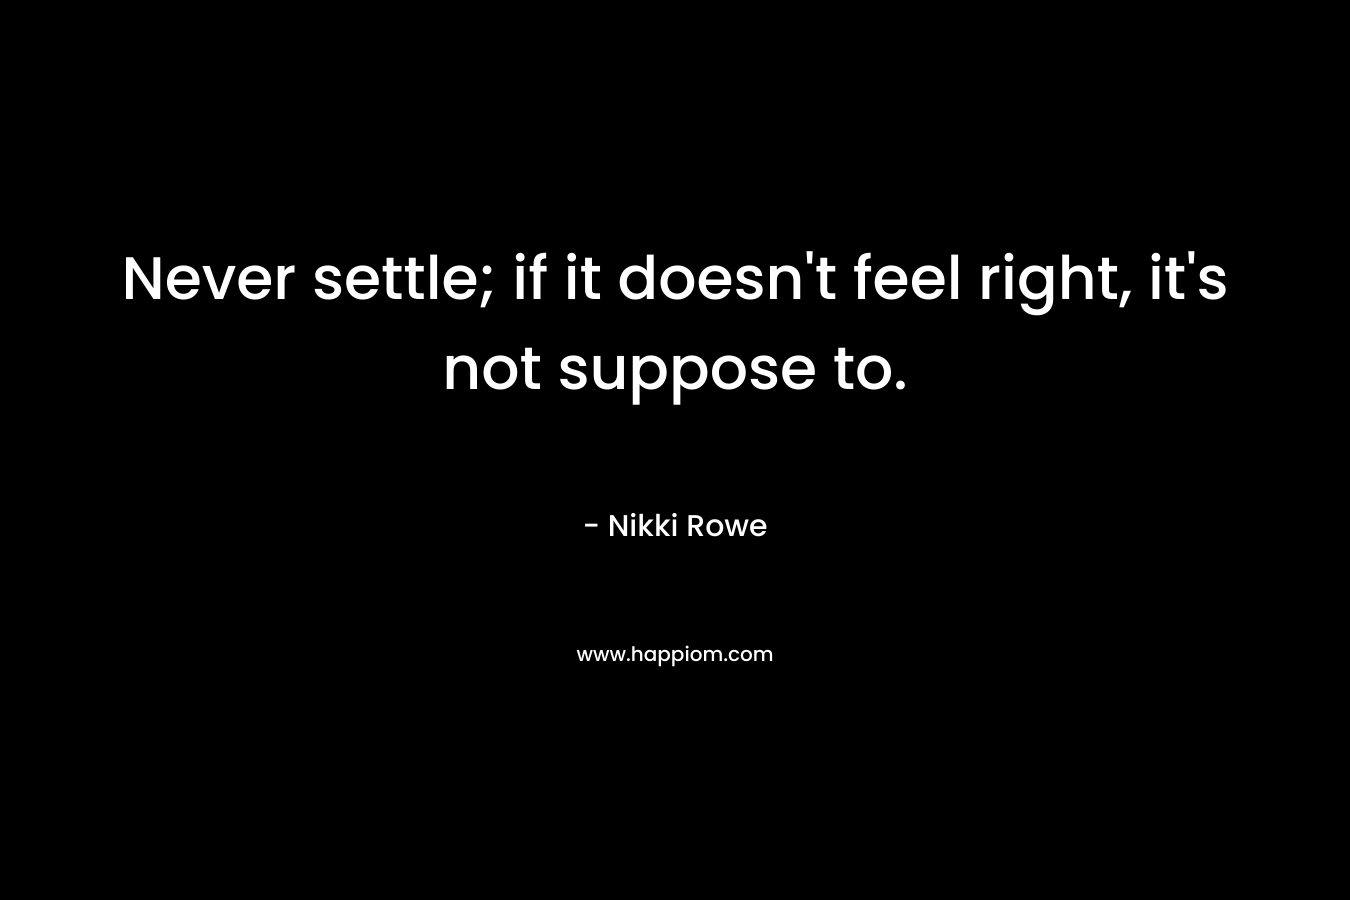 Never settle; if it doesn’t feel right, it’s not suppose to. – Nikki Rowe